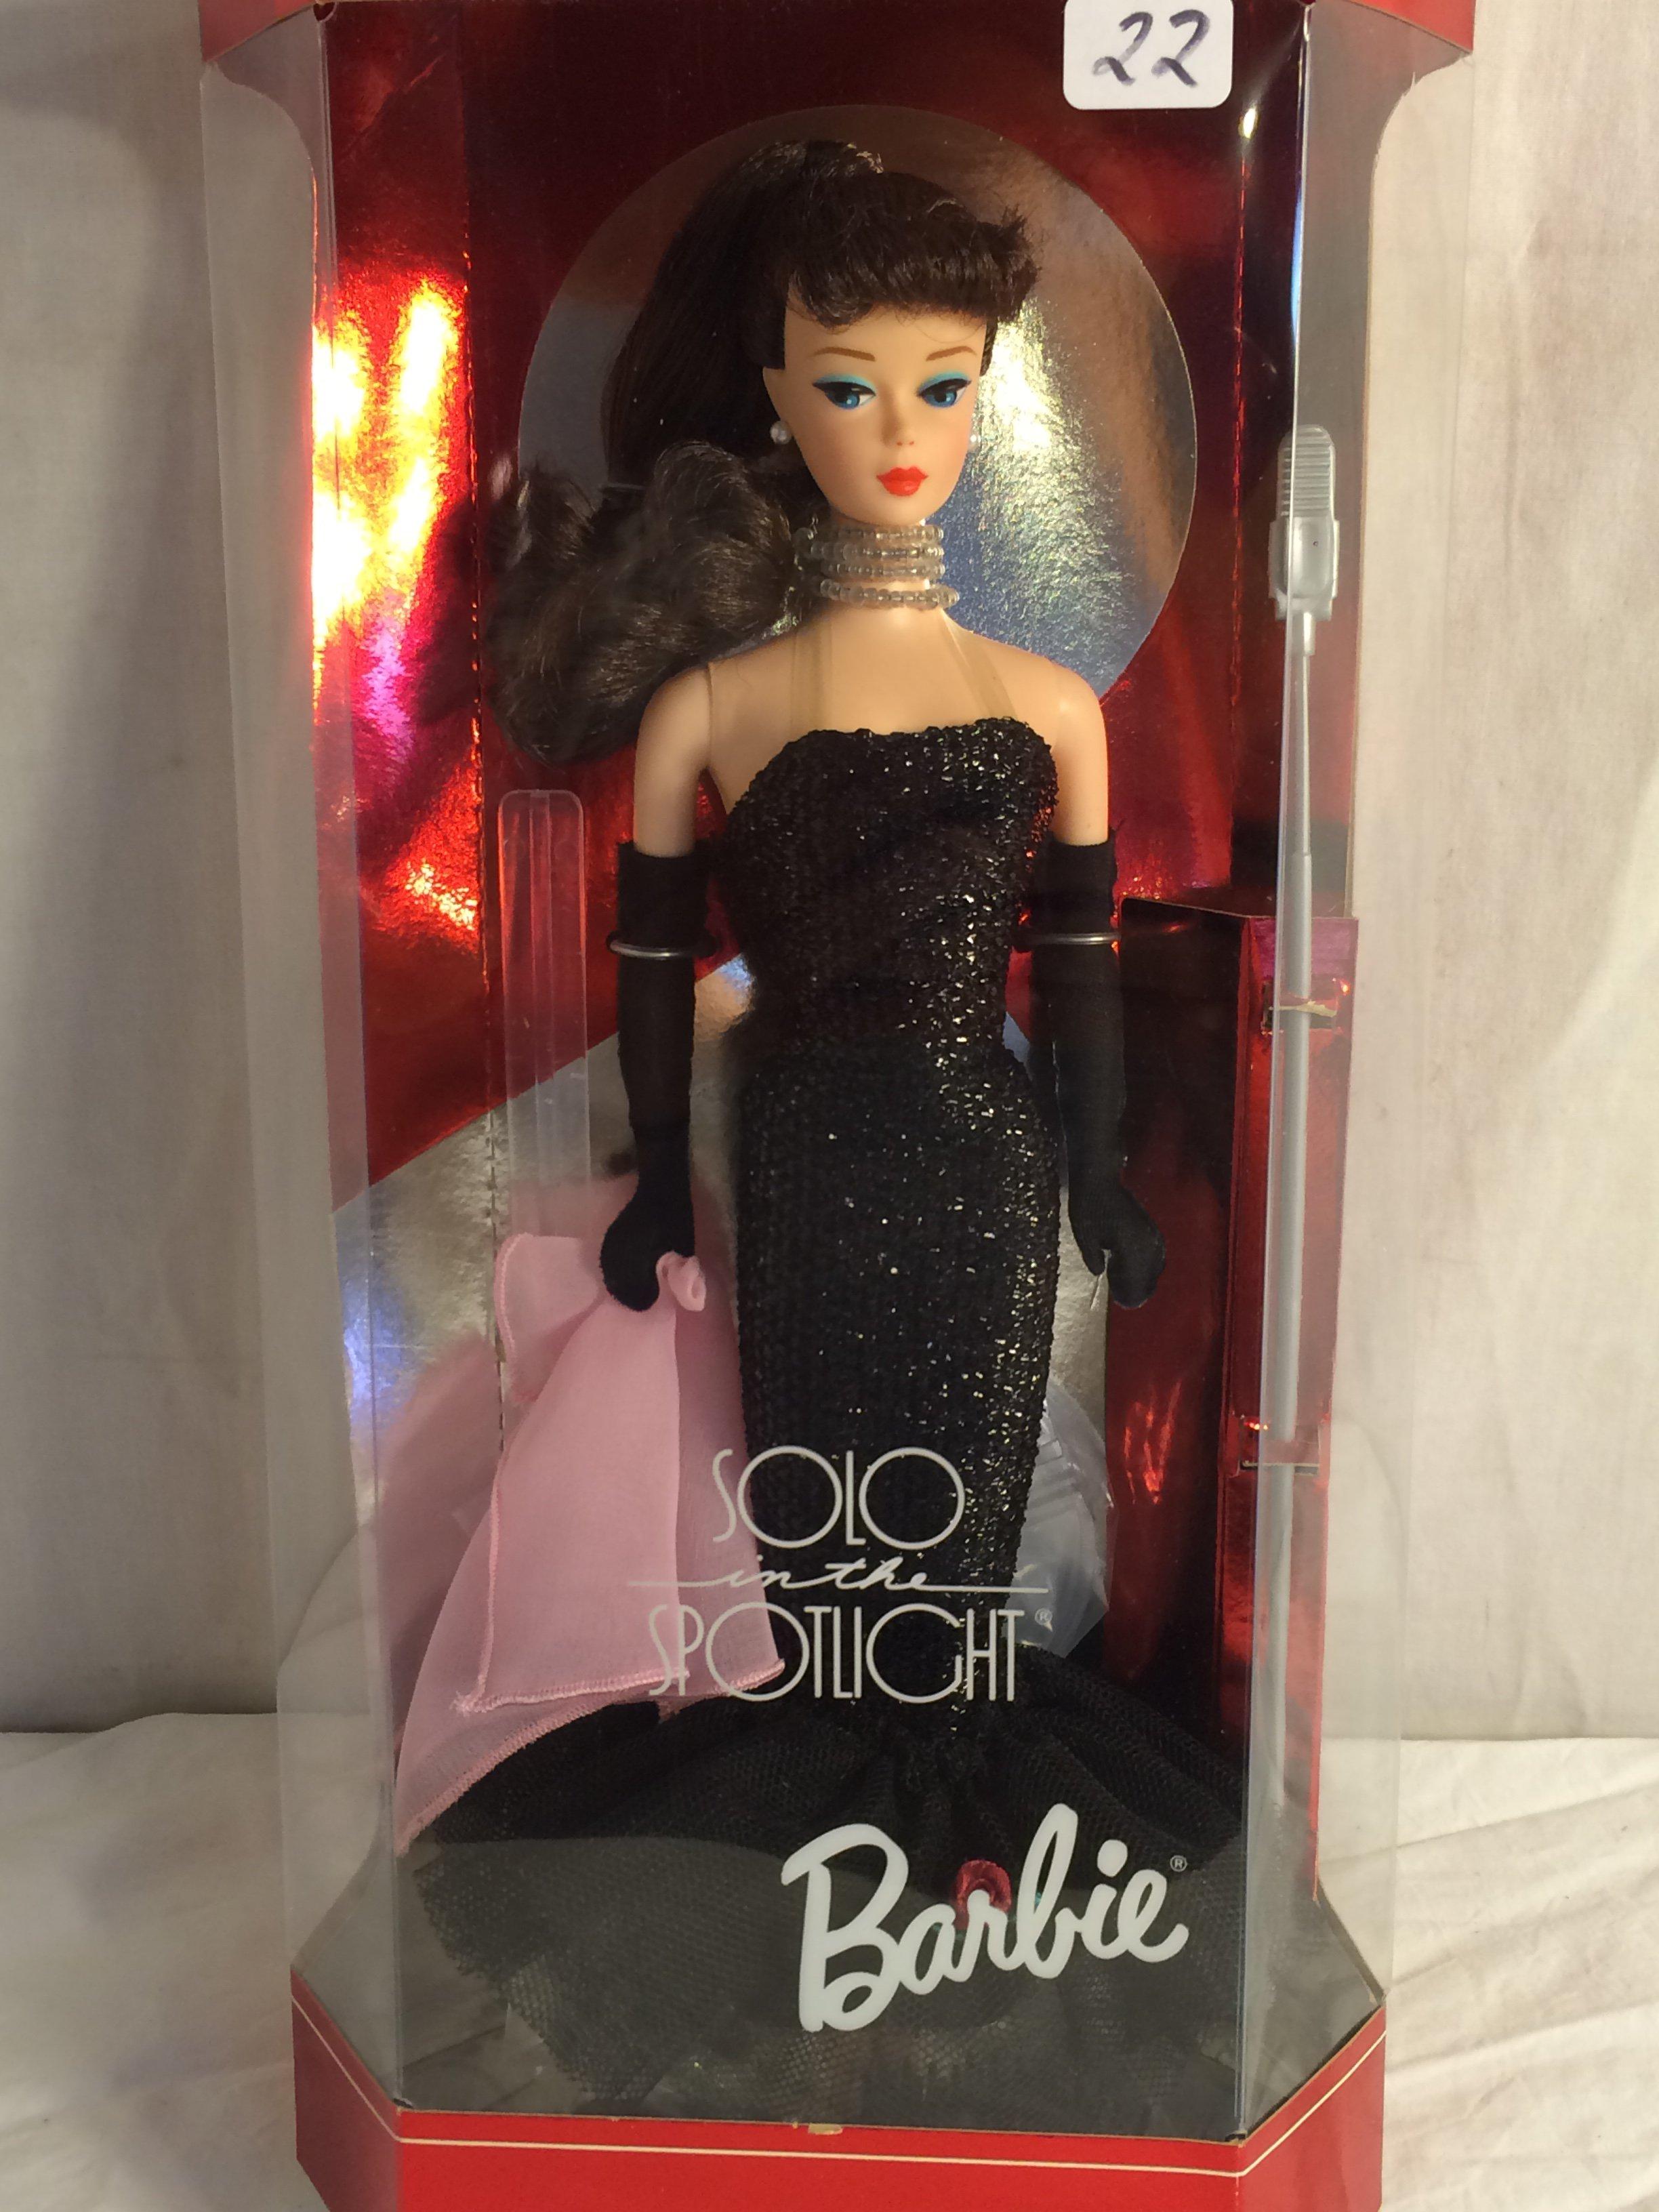 Collector Mattel Barbie Doll Solo In The Spotlight 1960 Doll Reproduction 12.3/4" tall By 6.5"W Box